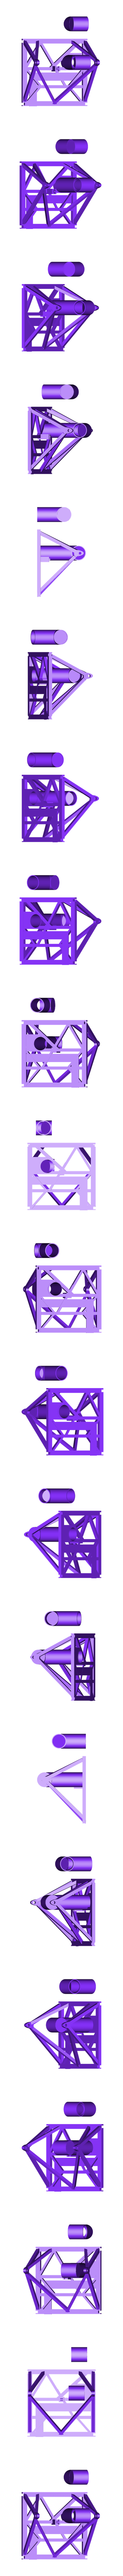 BWG-Upper-Alidade.stl Download free STL file BWG Deep Space Station Antenna • 3D printing model, spac3D